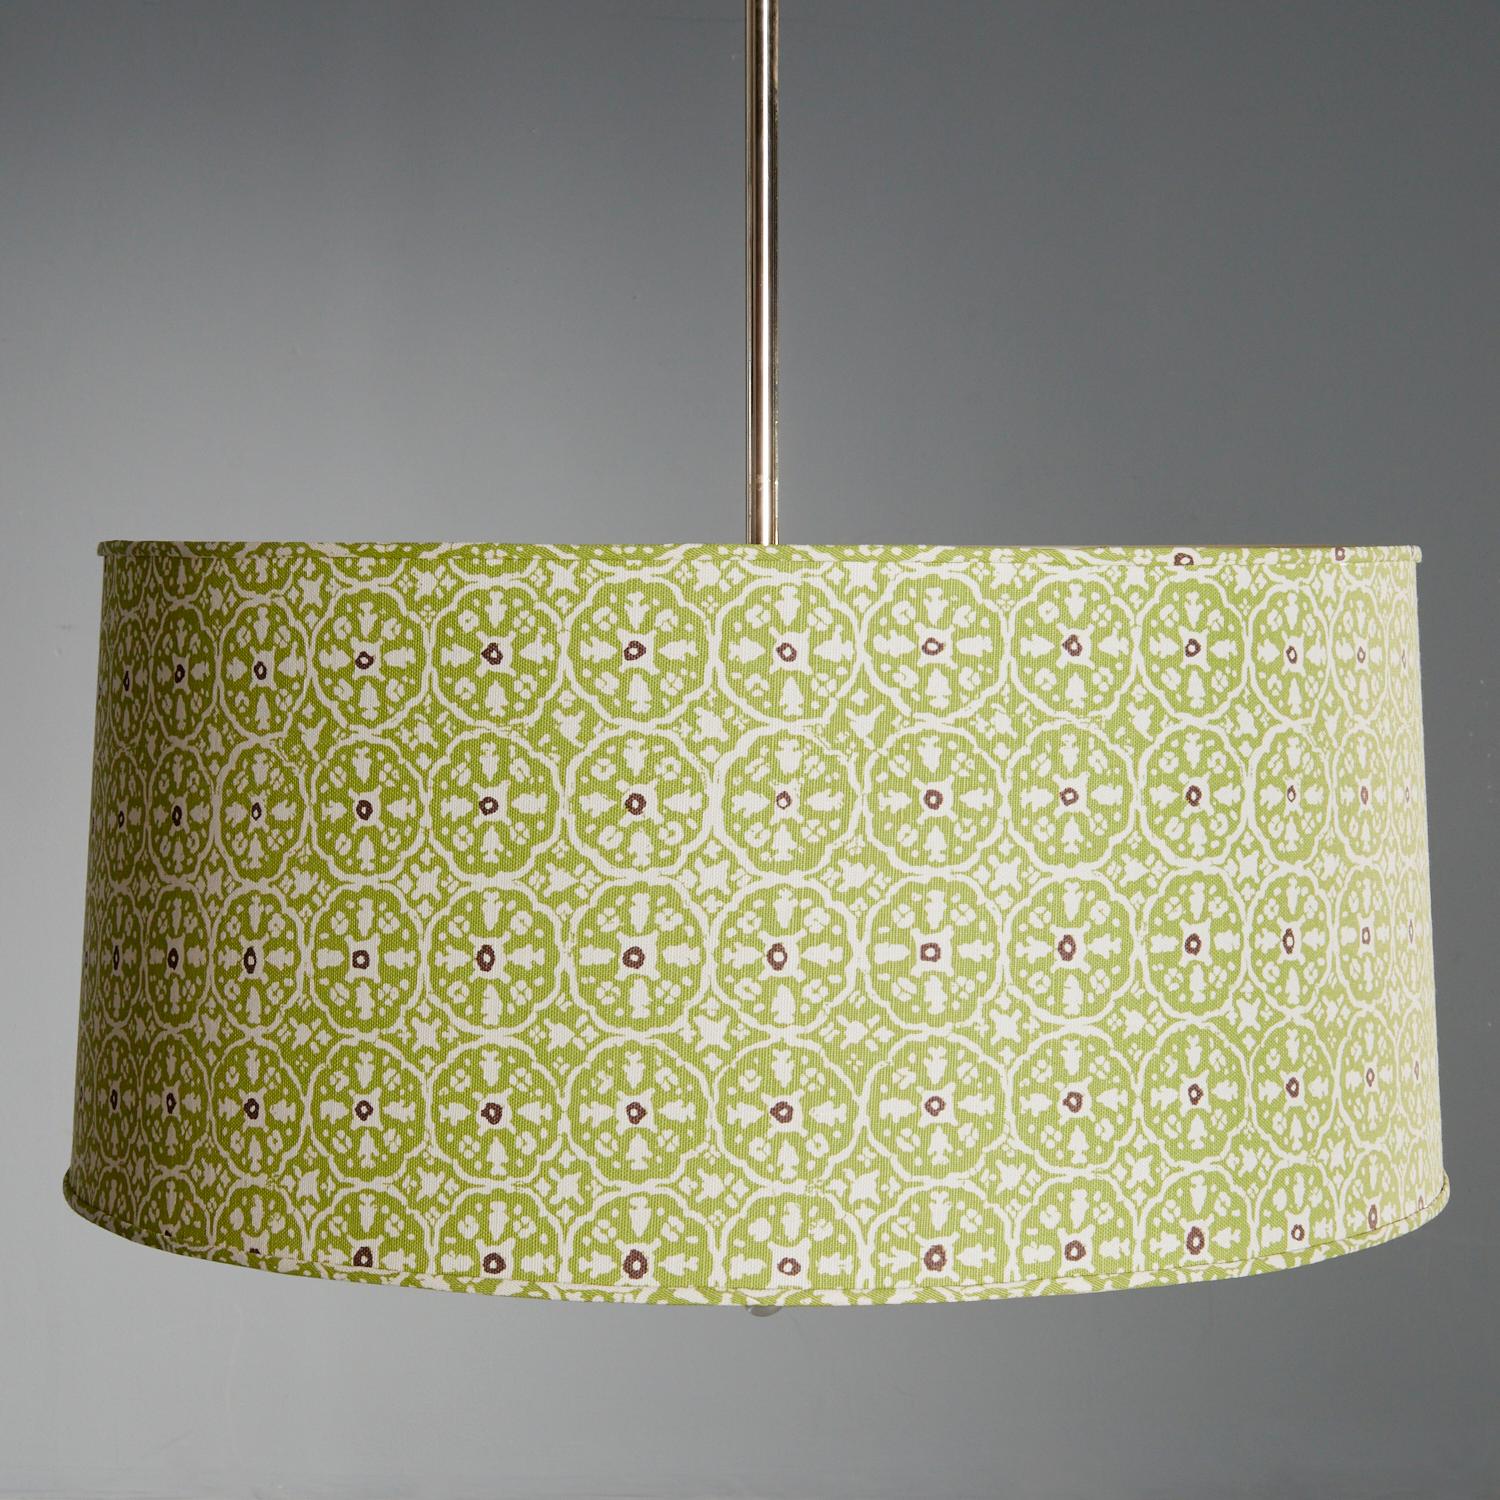 21st c., Large contemporary designer 3-light drum shade in a floral print fabric with polished nickel downrod.  No visible signature. The fabric is in an abstract green floral pattern with a small dark purple floral center, on a white